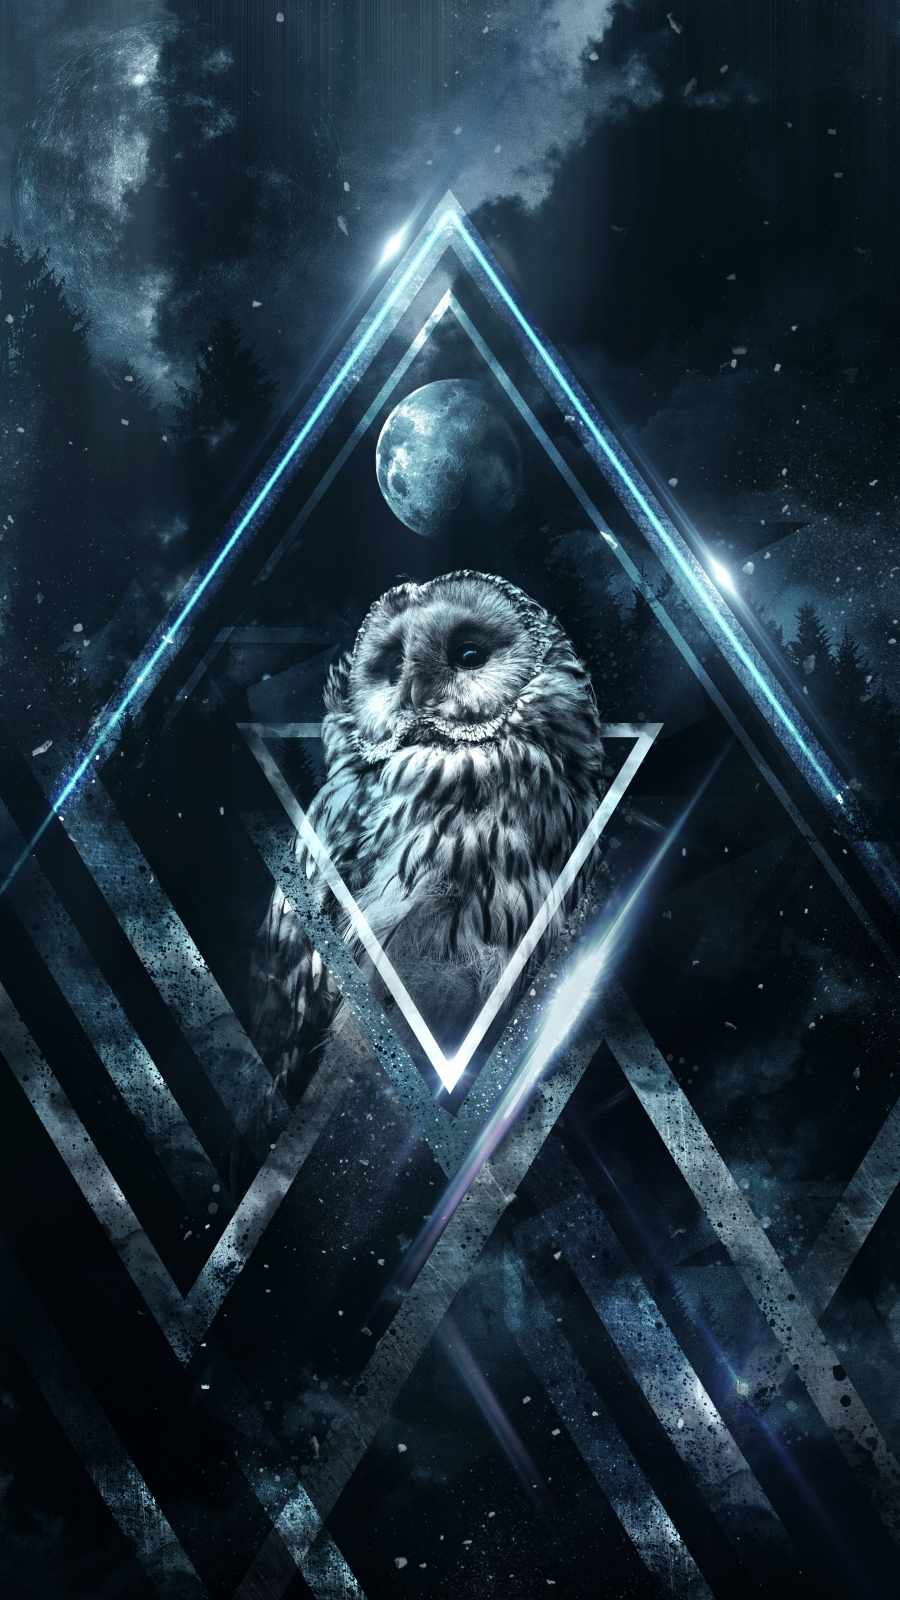 Night Owl - IPhone Wallpapers : iPhone Wallpapers